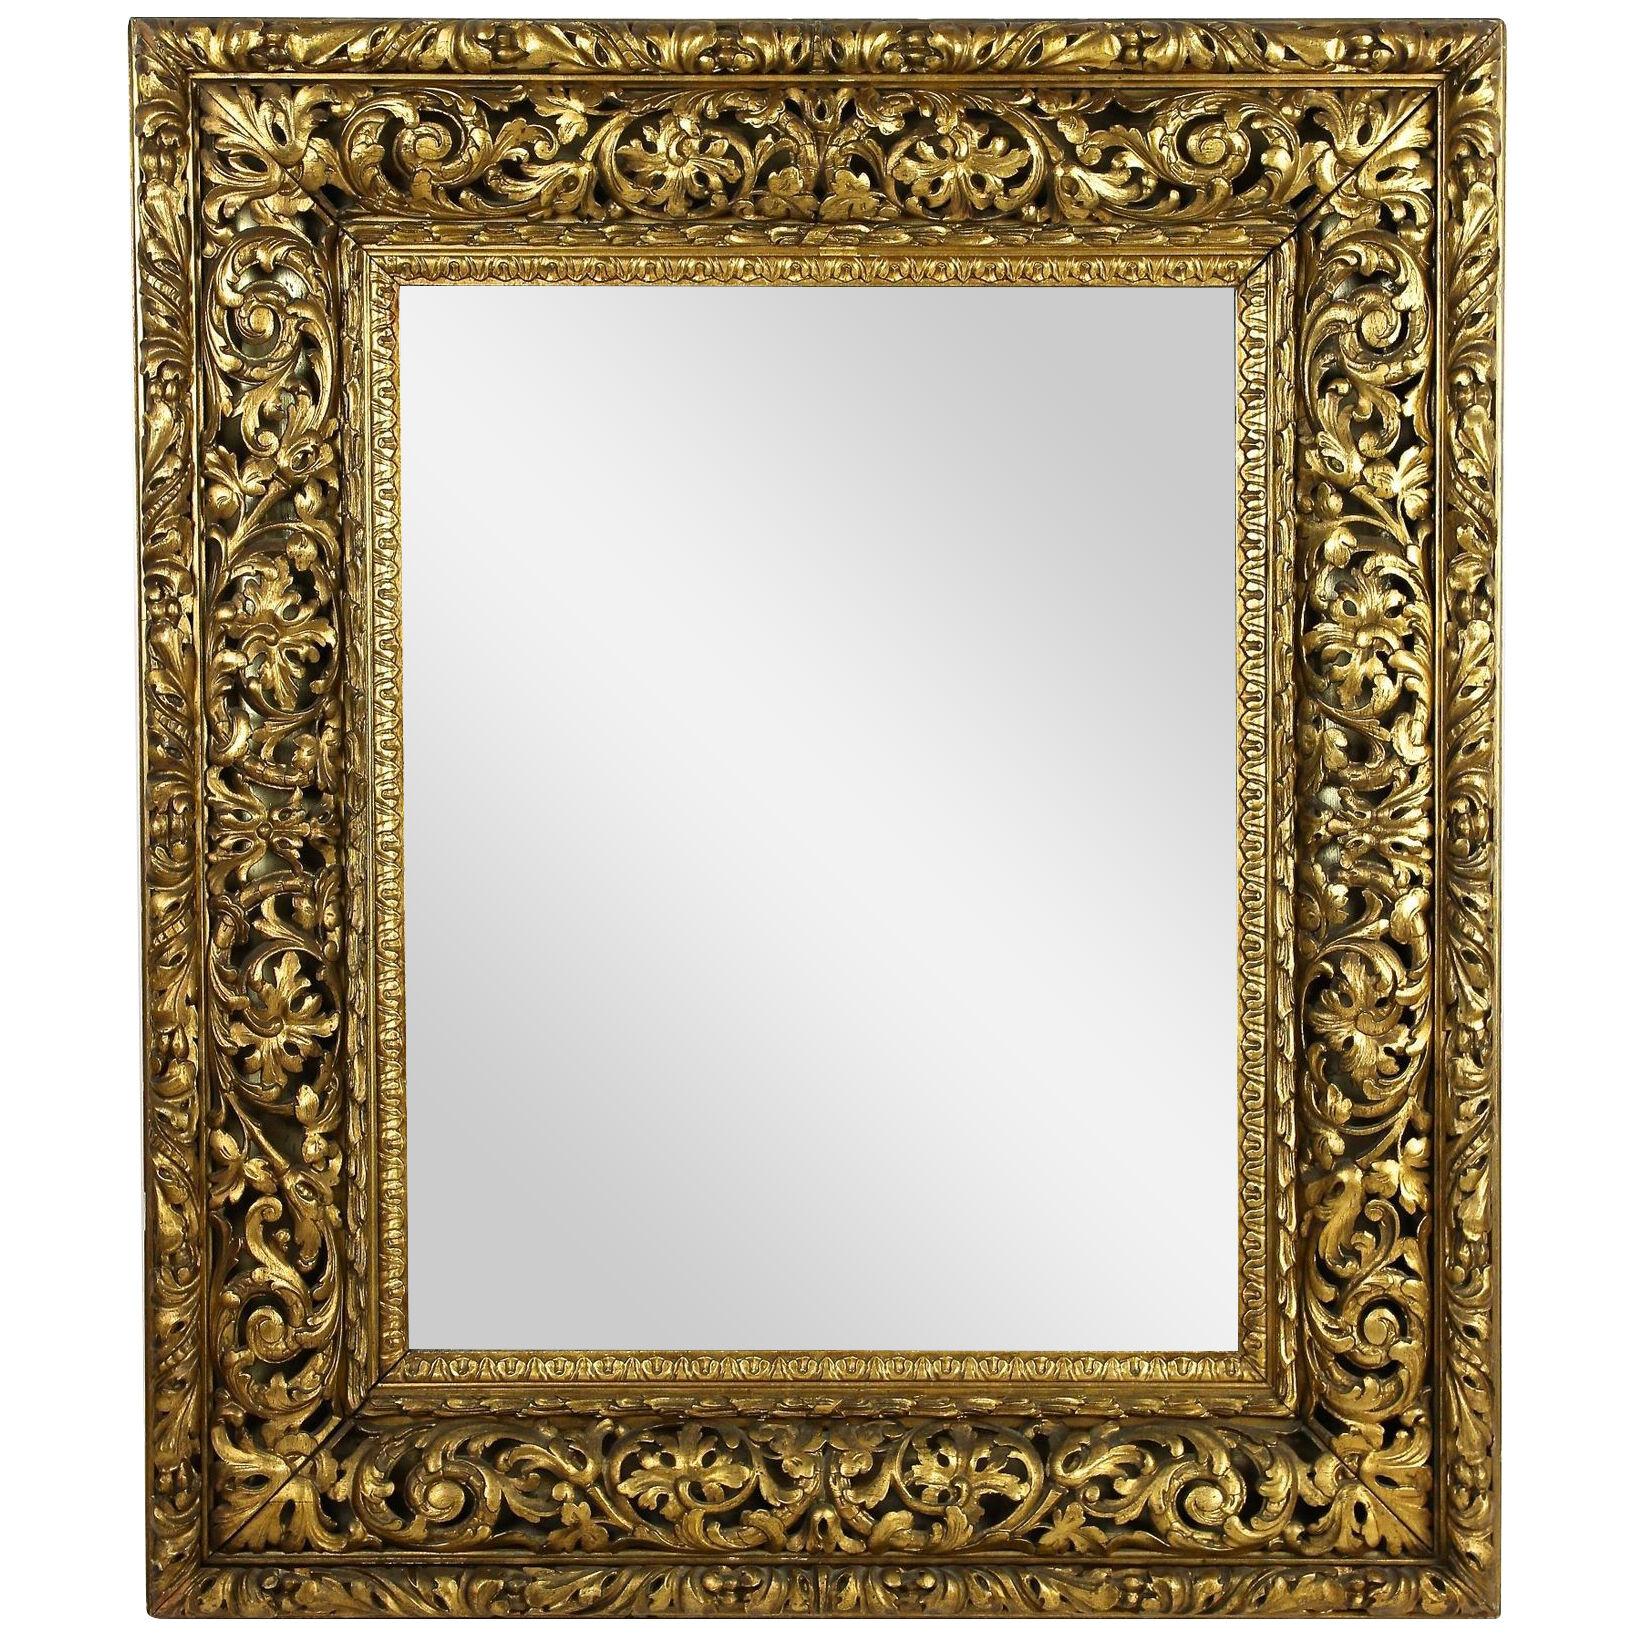 19th Century Gilt Florentine Wall Mirror Open Worked, Italy ca. 1830